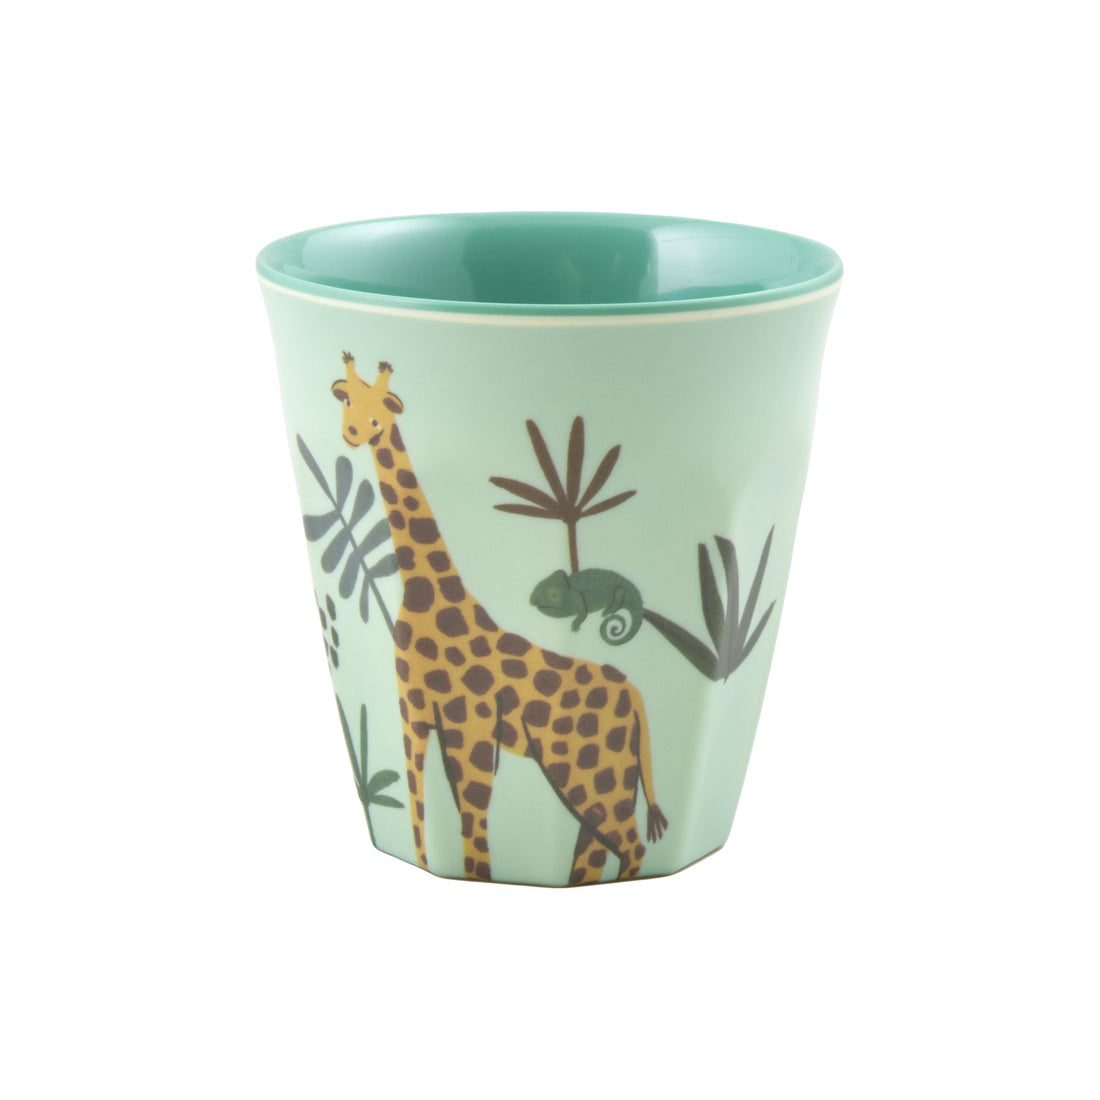 rice-dk-melamine-kids-cup-with-blue-jungle-animal-print-small-160-ml-rice-kicup-jungb2